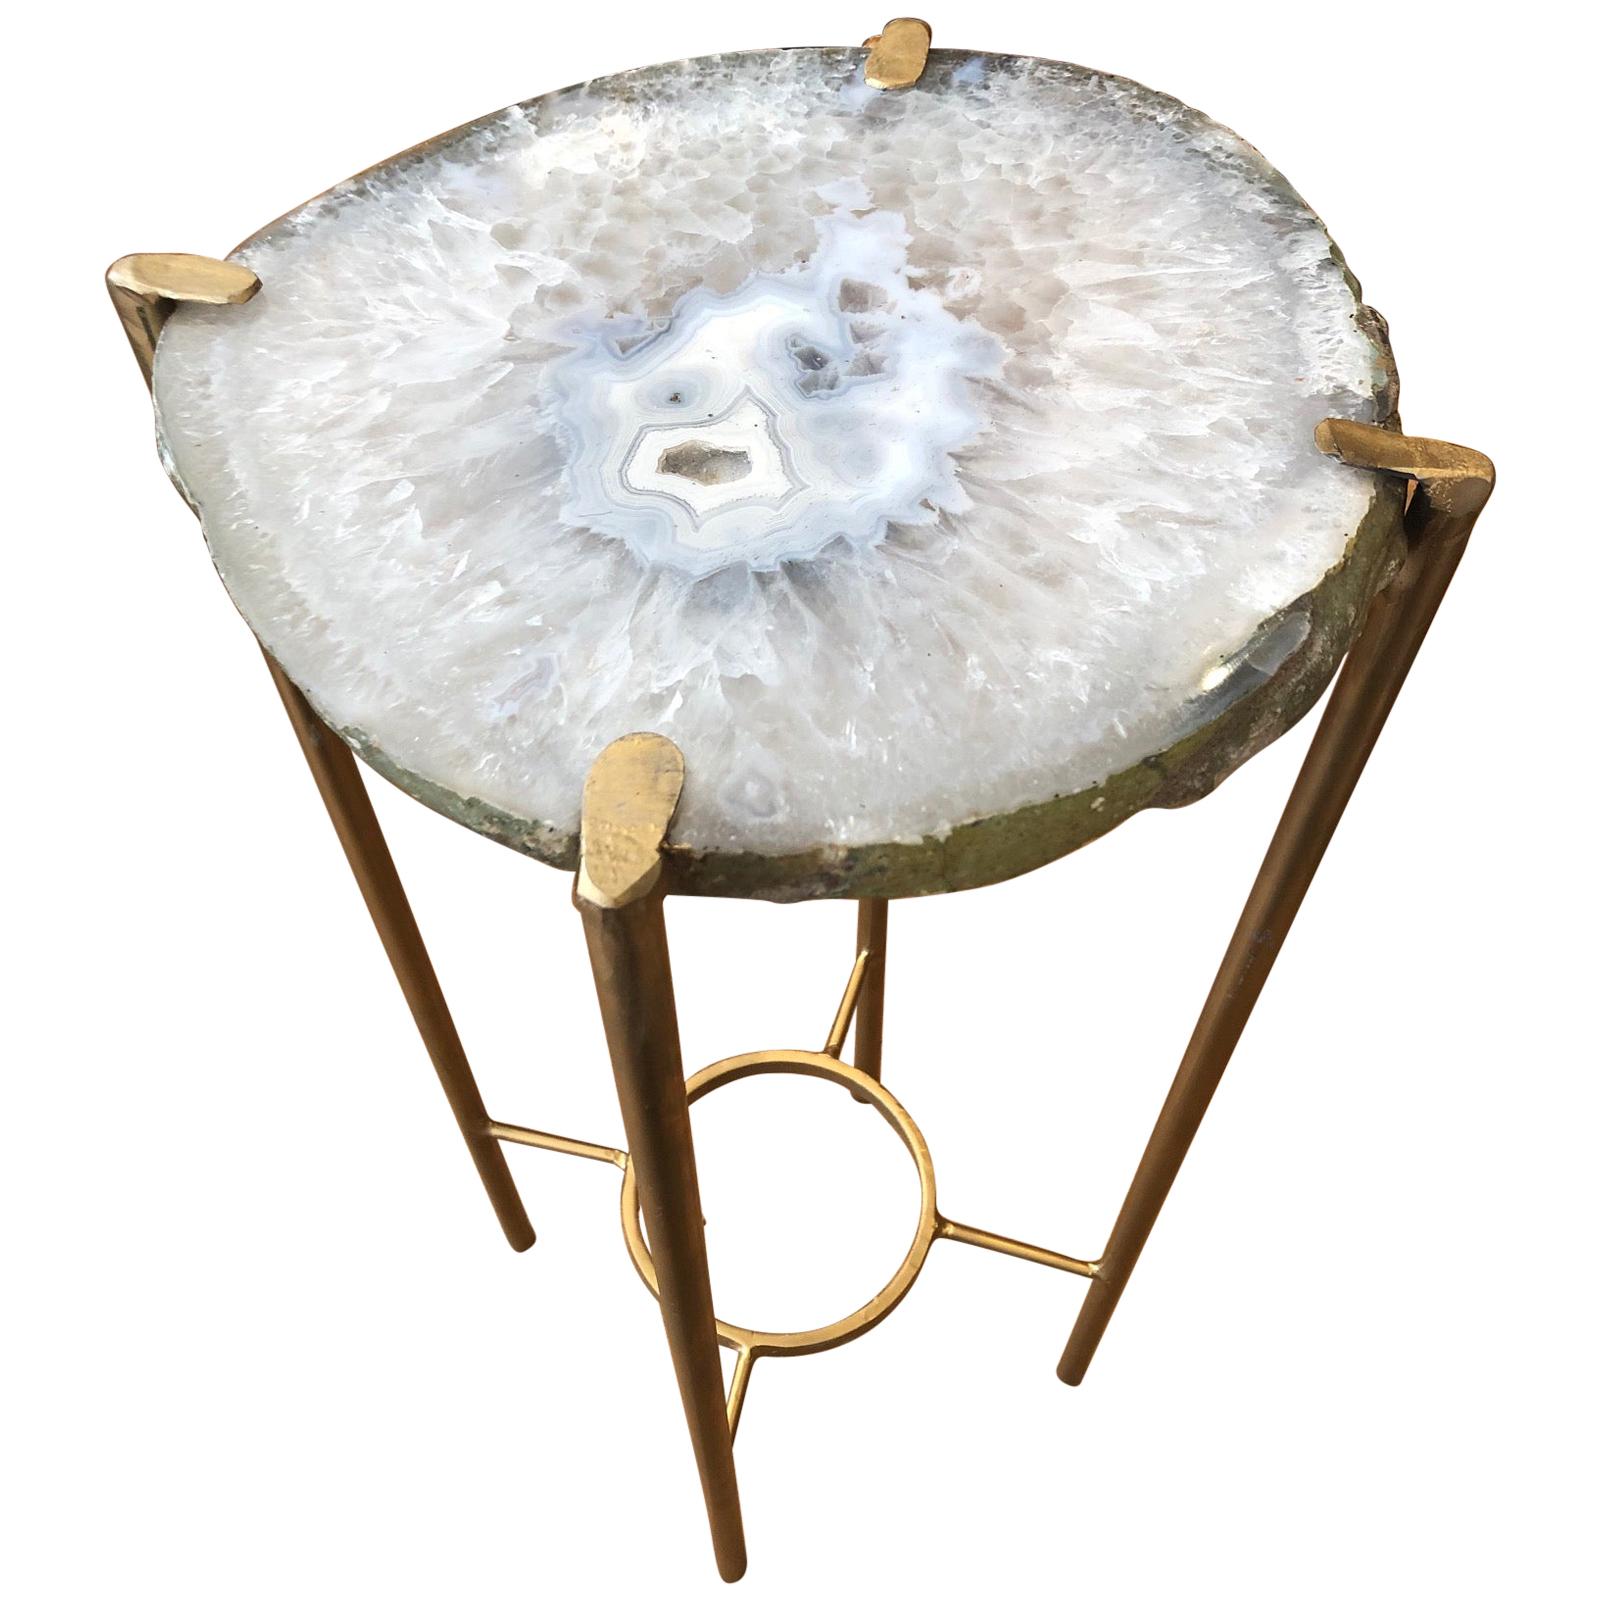 Contemporary Smokey White and Blue Quartz End Table with Exposed Crystal Center